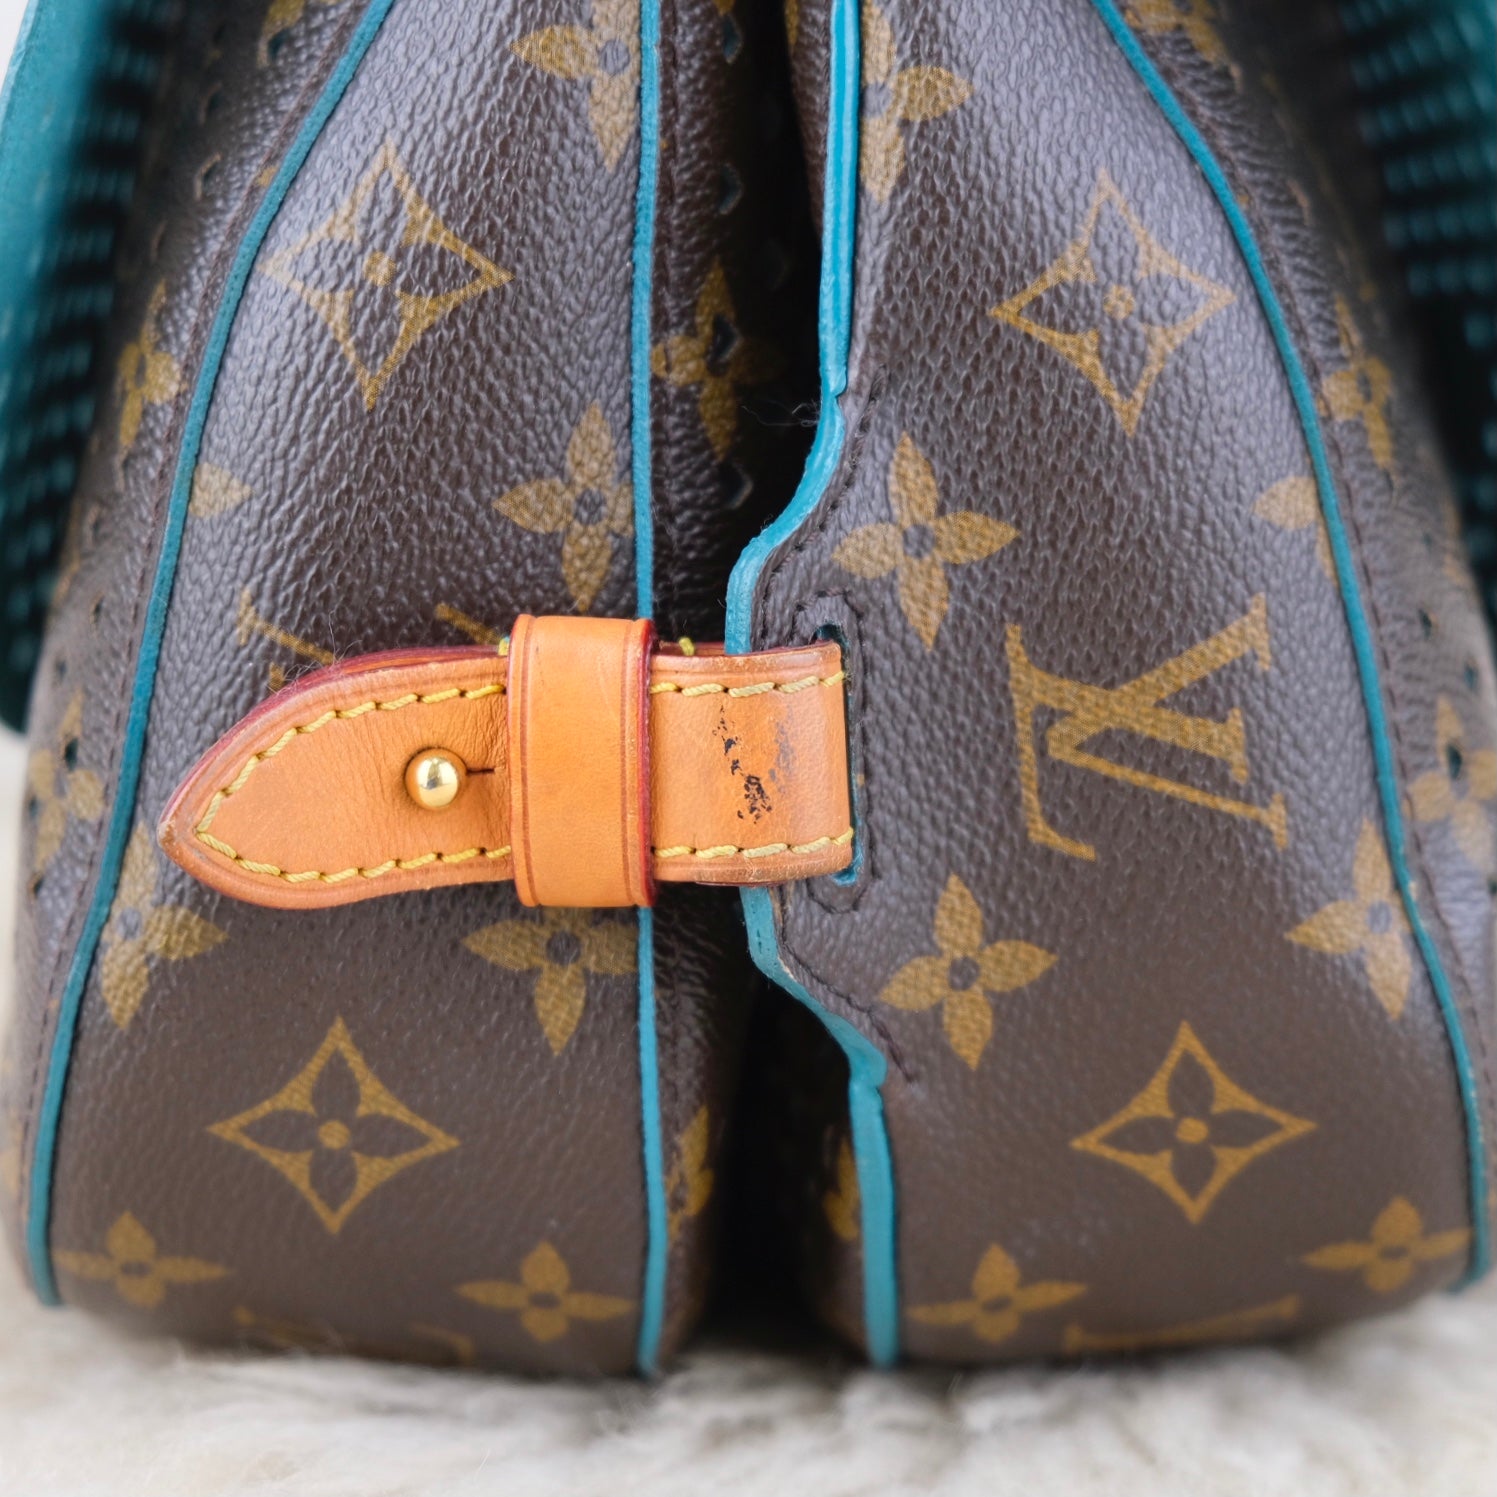 turquoise bag louis vuittons